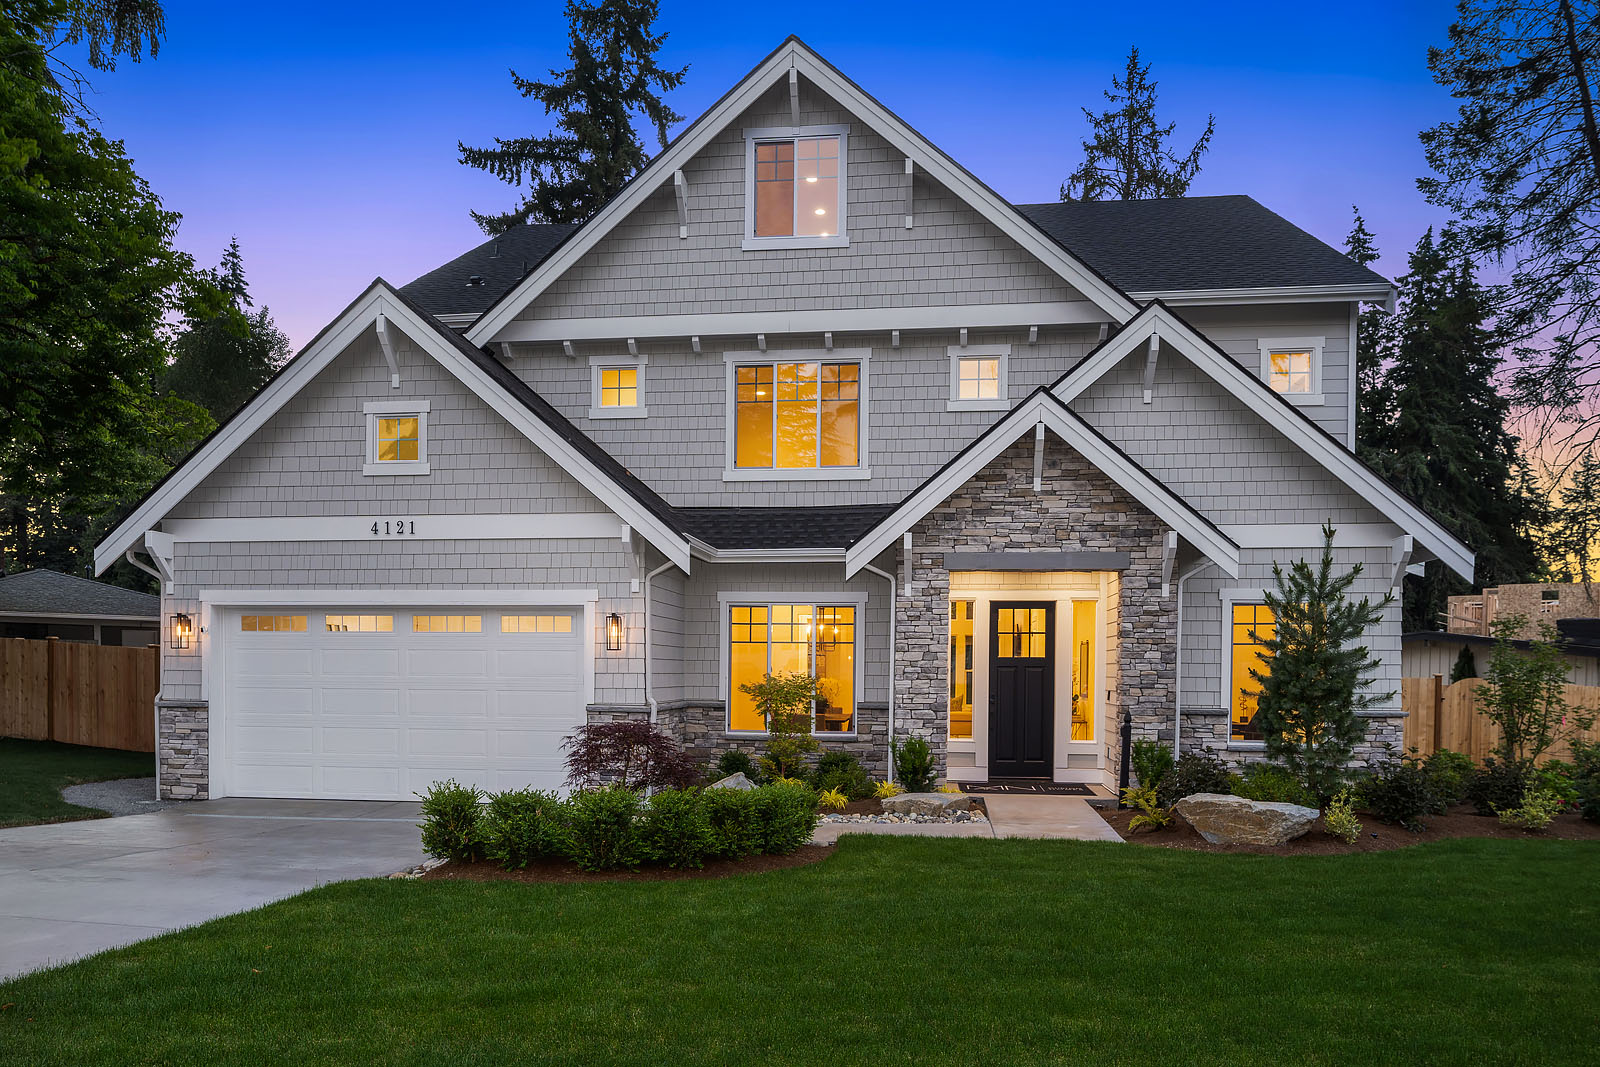 View our new luxury home construction on 4121 152nd Ave SE, in Bellevue, WA from MN Custom Homes